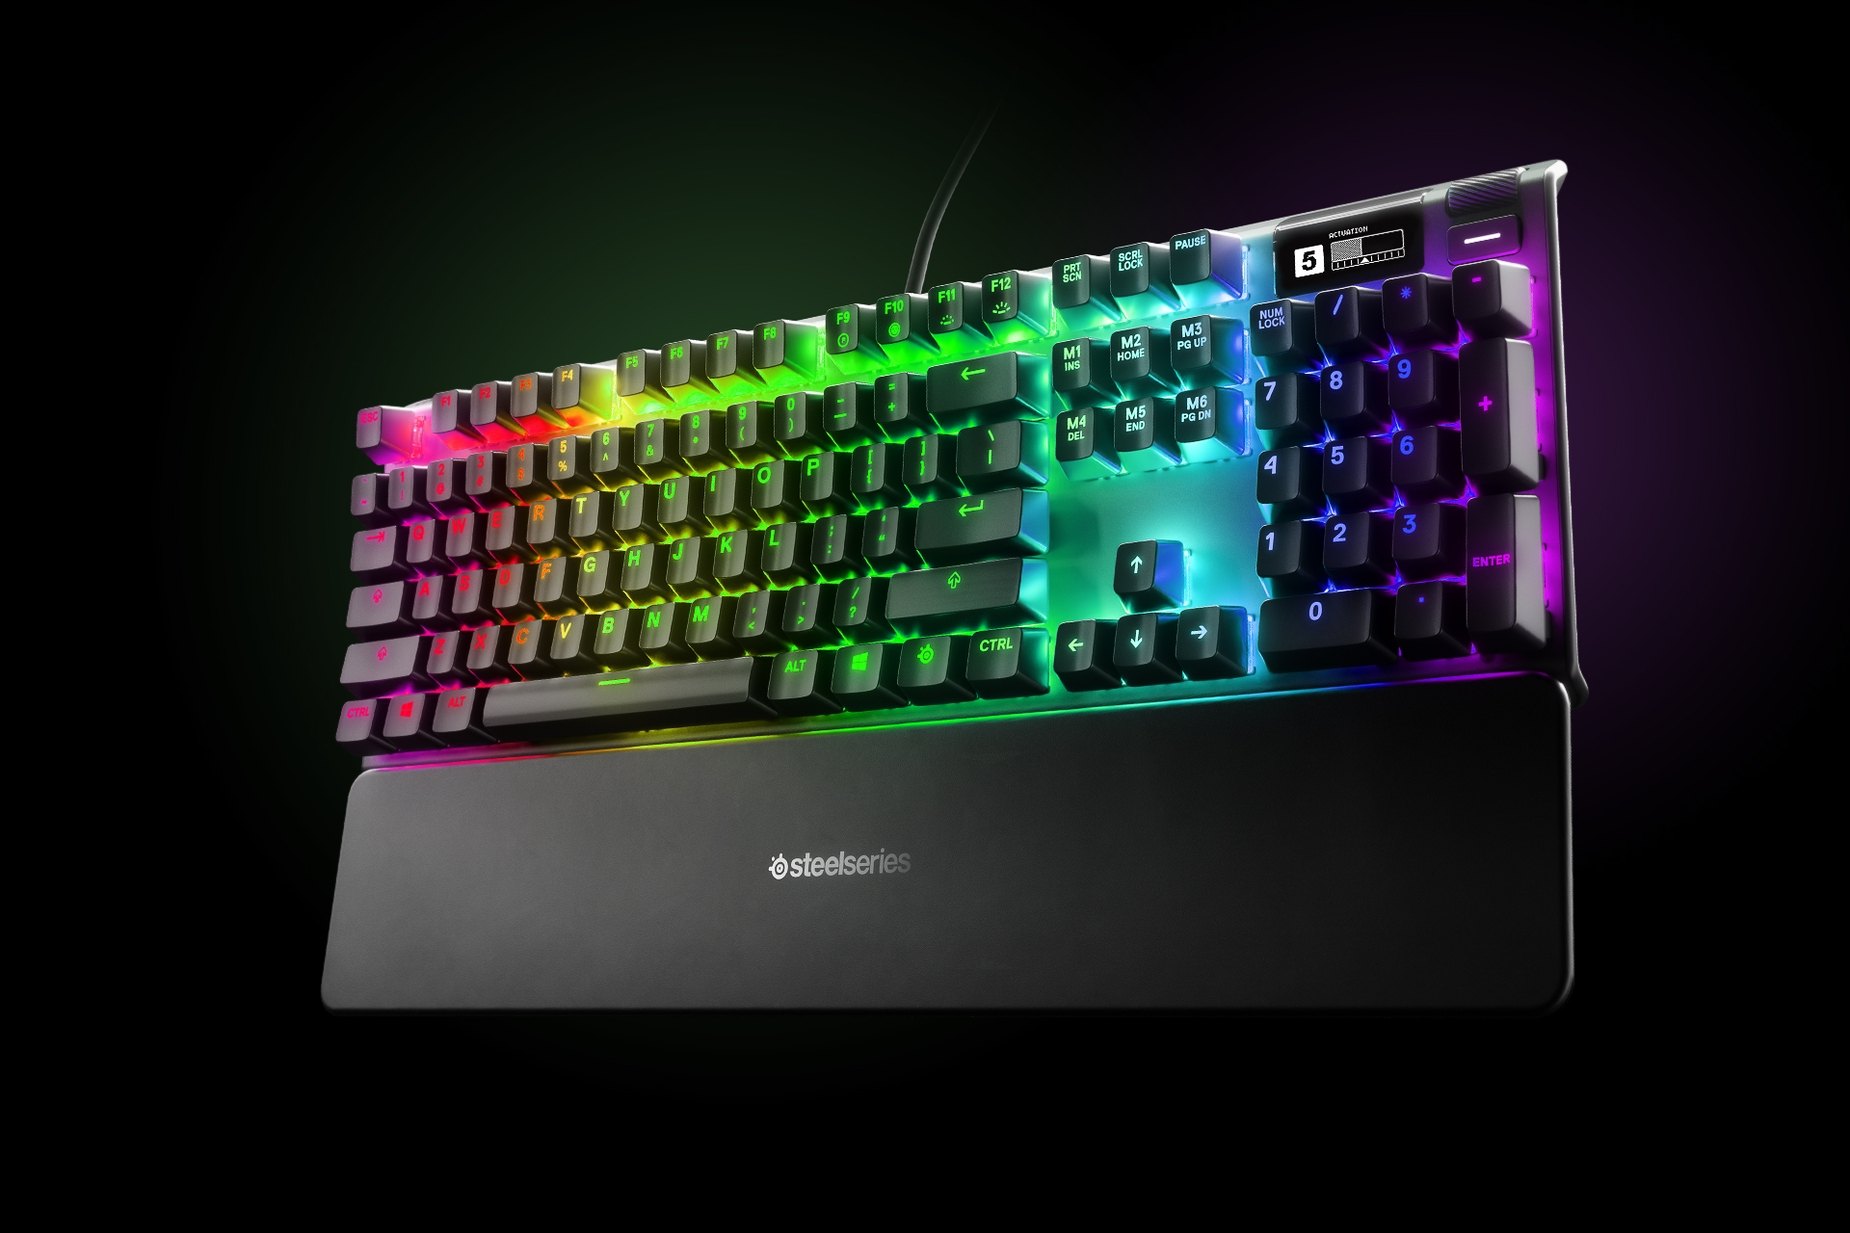 
 German - Apex Pro gaming keyboard with the illumination lit up on dark background, also shows the OLED screen and controls used to change settings, switch actuation, and adjust audio
 